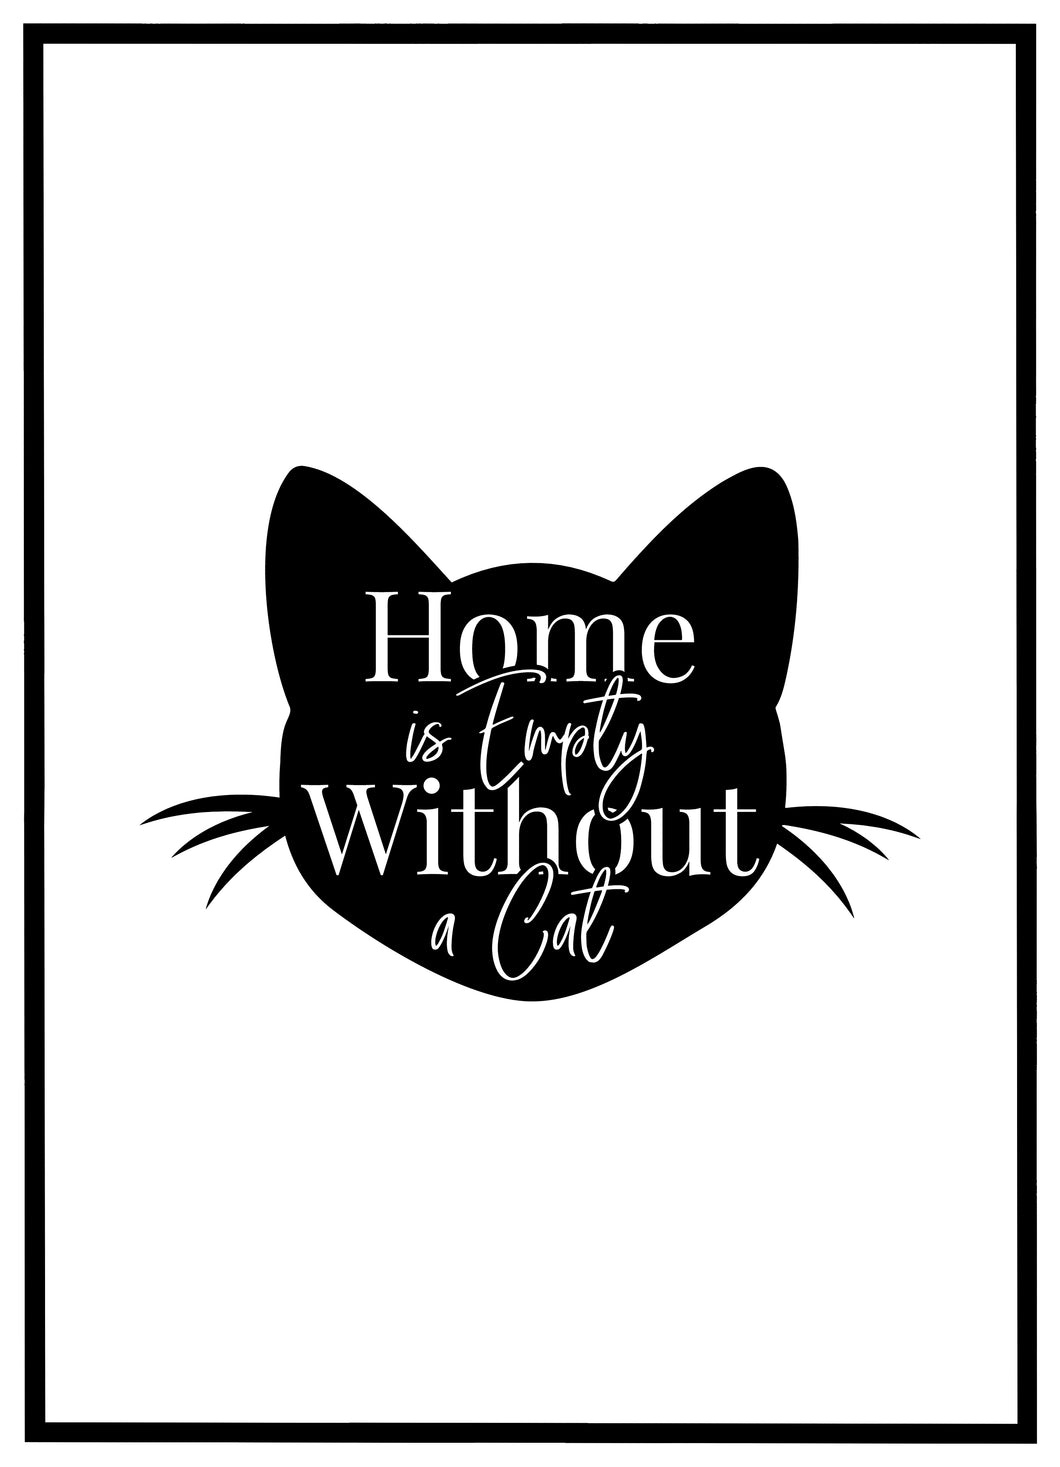 Home is Empty Without a Cat - Plakat